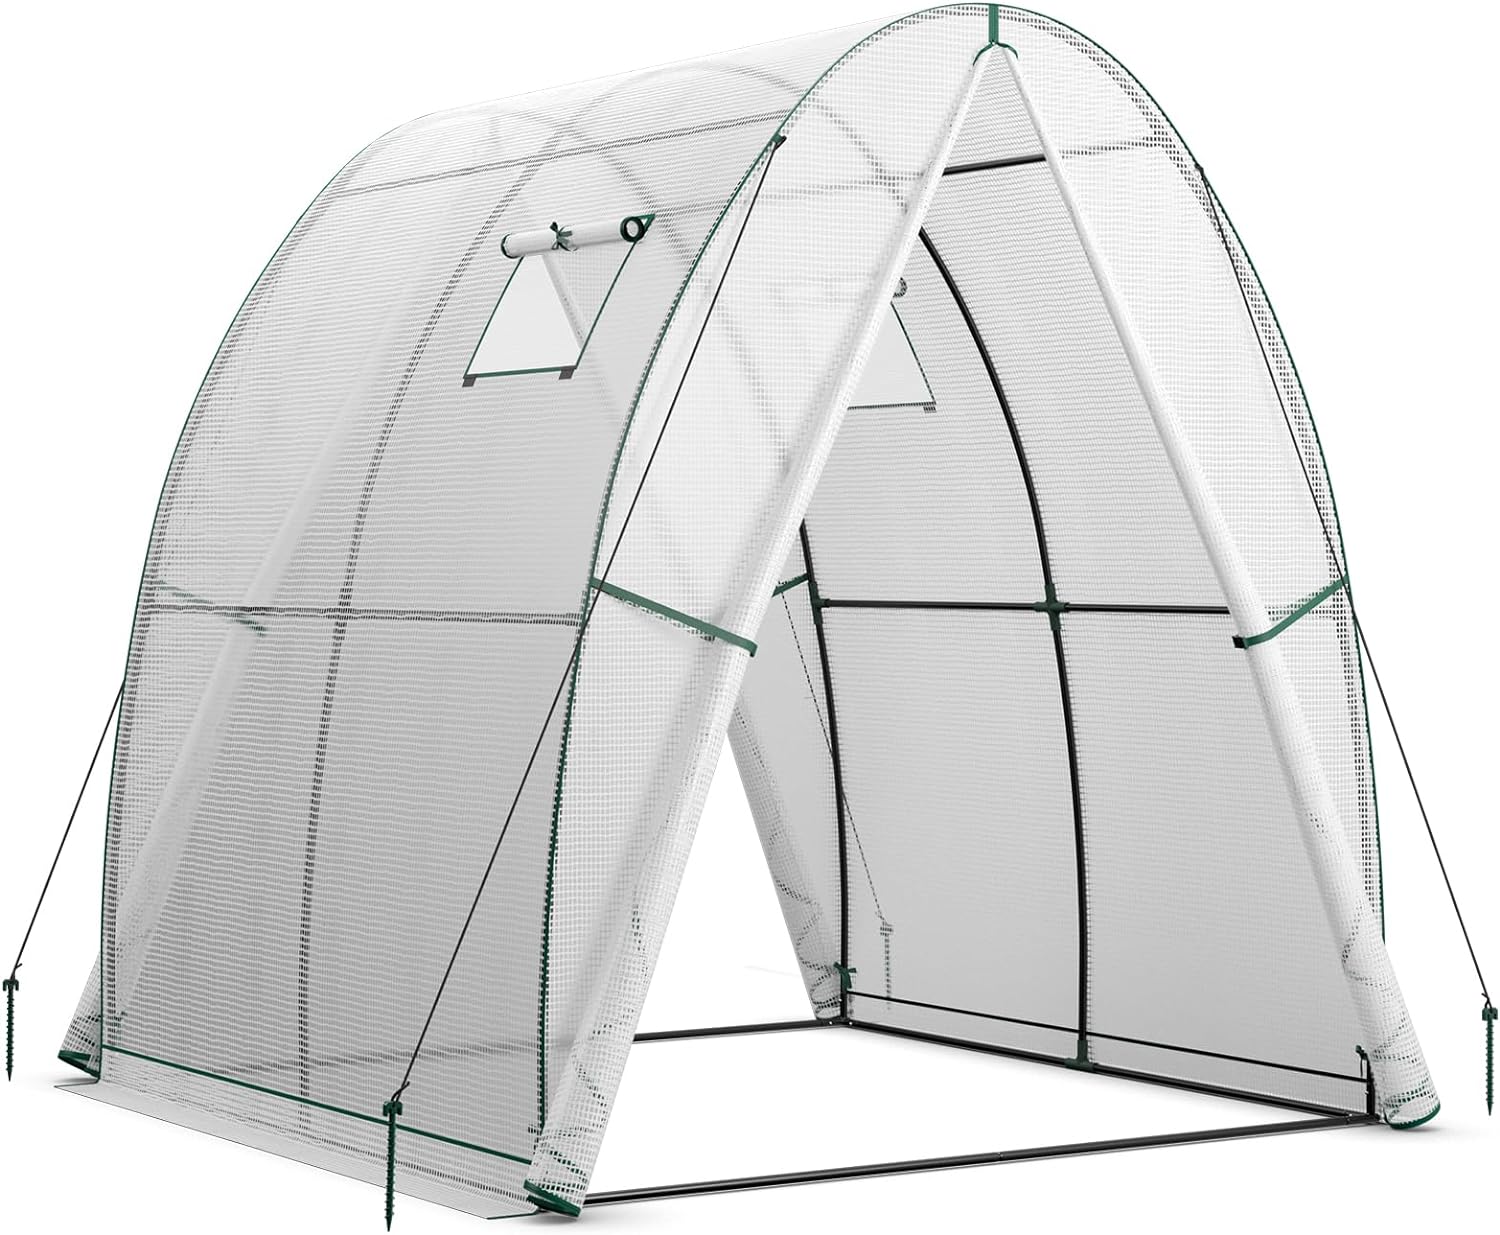 Giantex 6x6x6.6 FT Greenhouse, Outdoor Wall-in Tunnel Greenhouse with Ground Stakes, Rope, 2 Zippered Doors